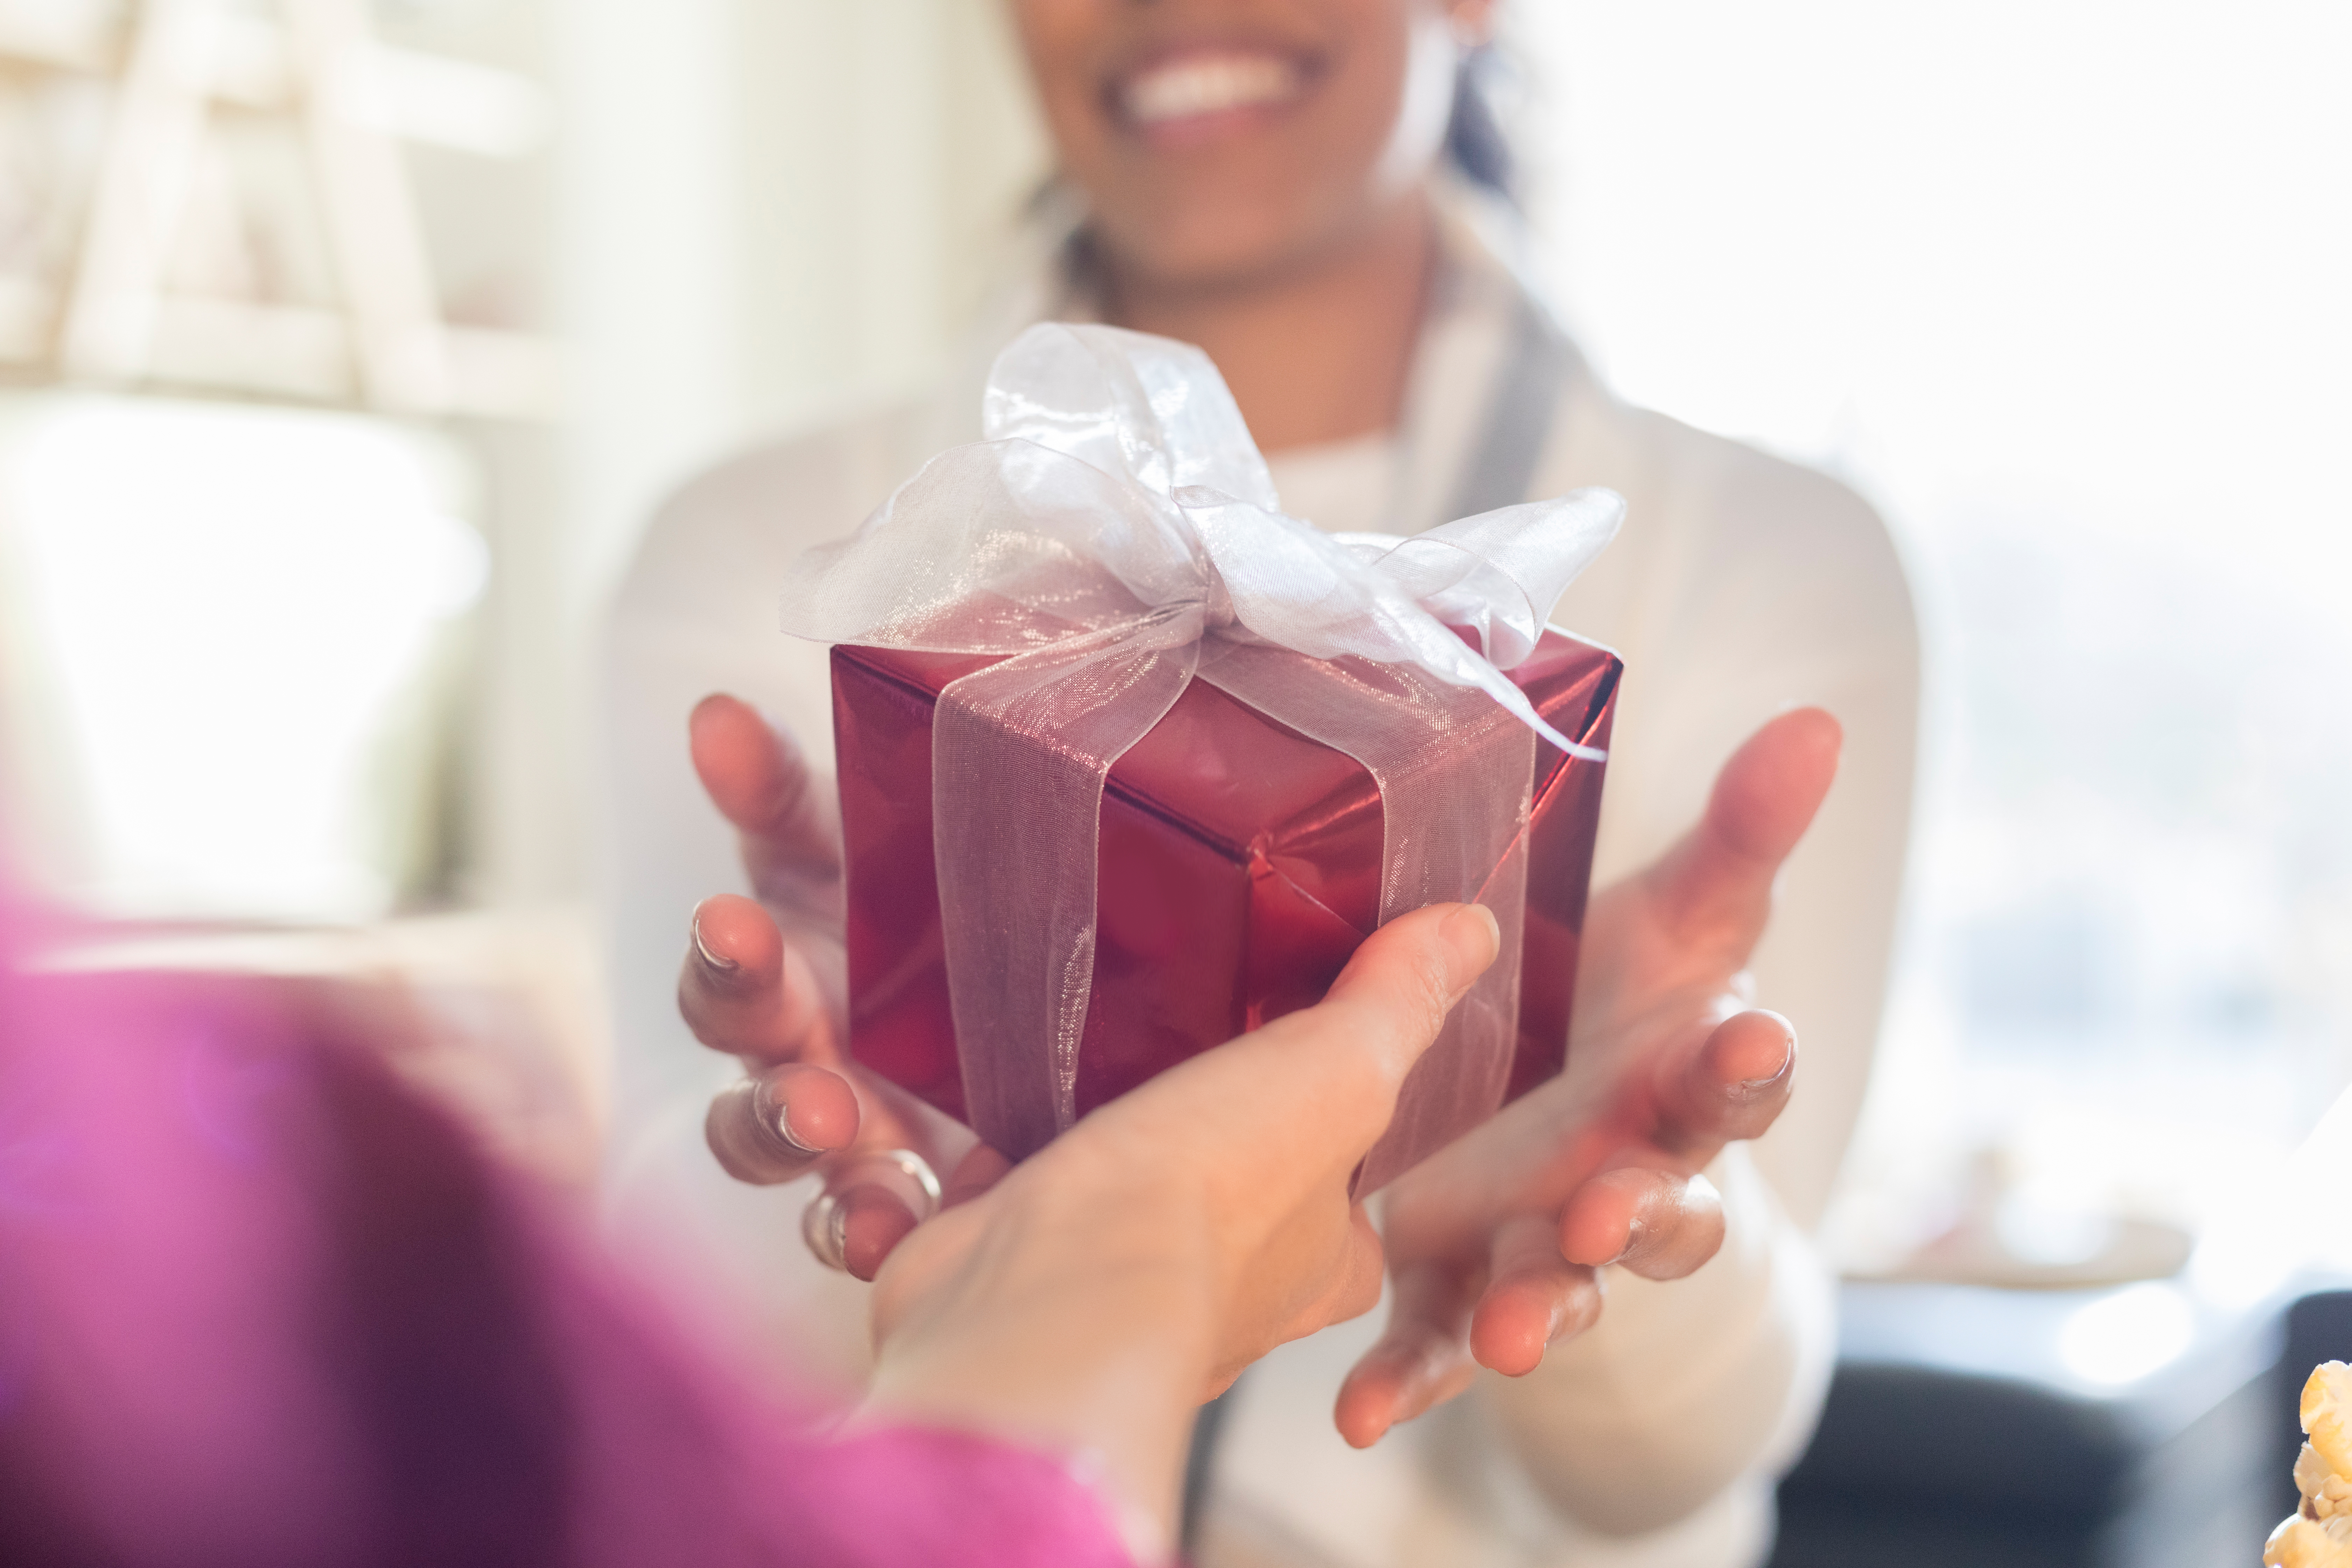 Corporate gift guide 2019: How to woo your clients 